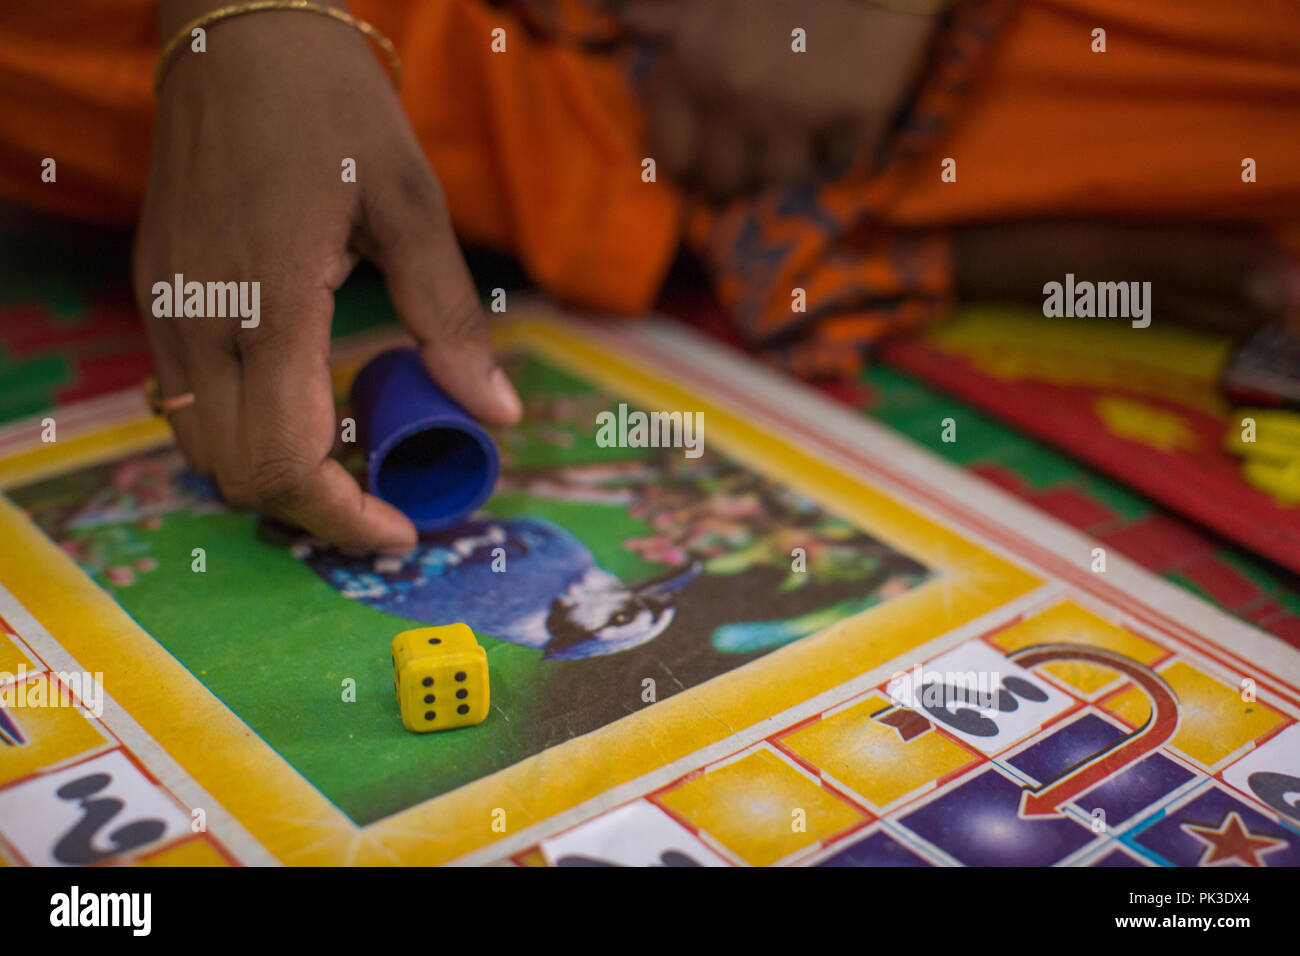 A woman rolling a one on a dice during a board game, Dhaka, Bangladesh. Stock Photo